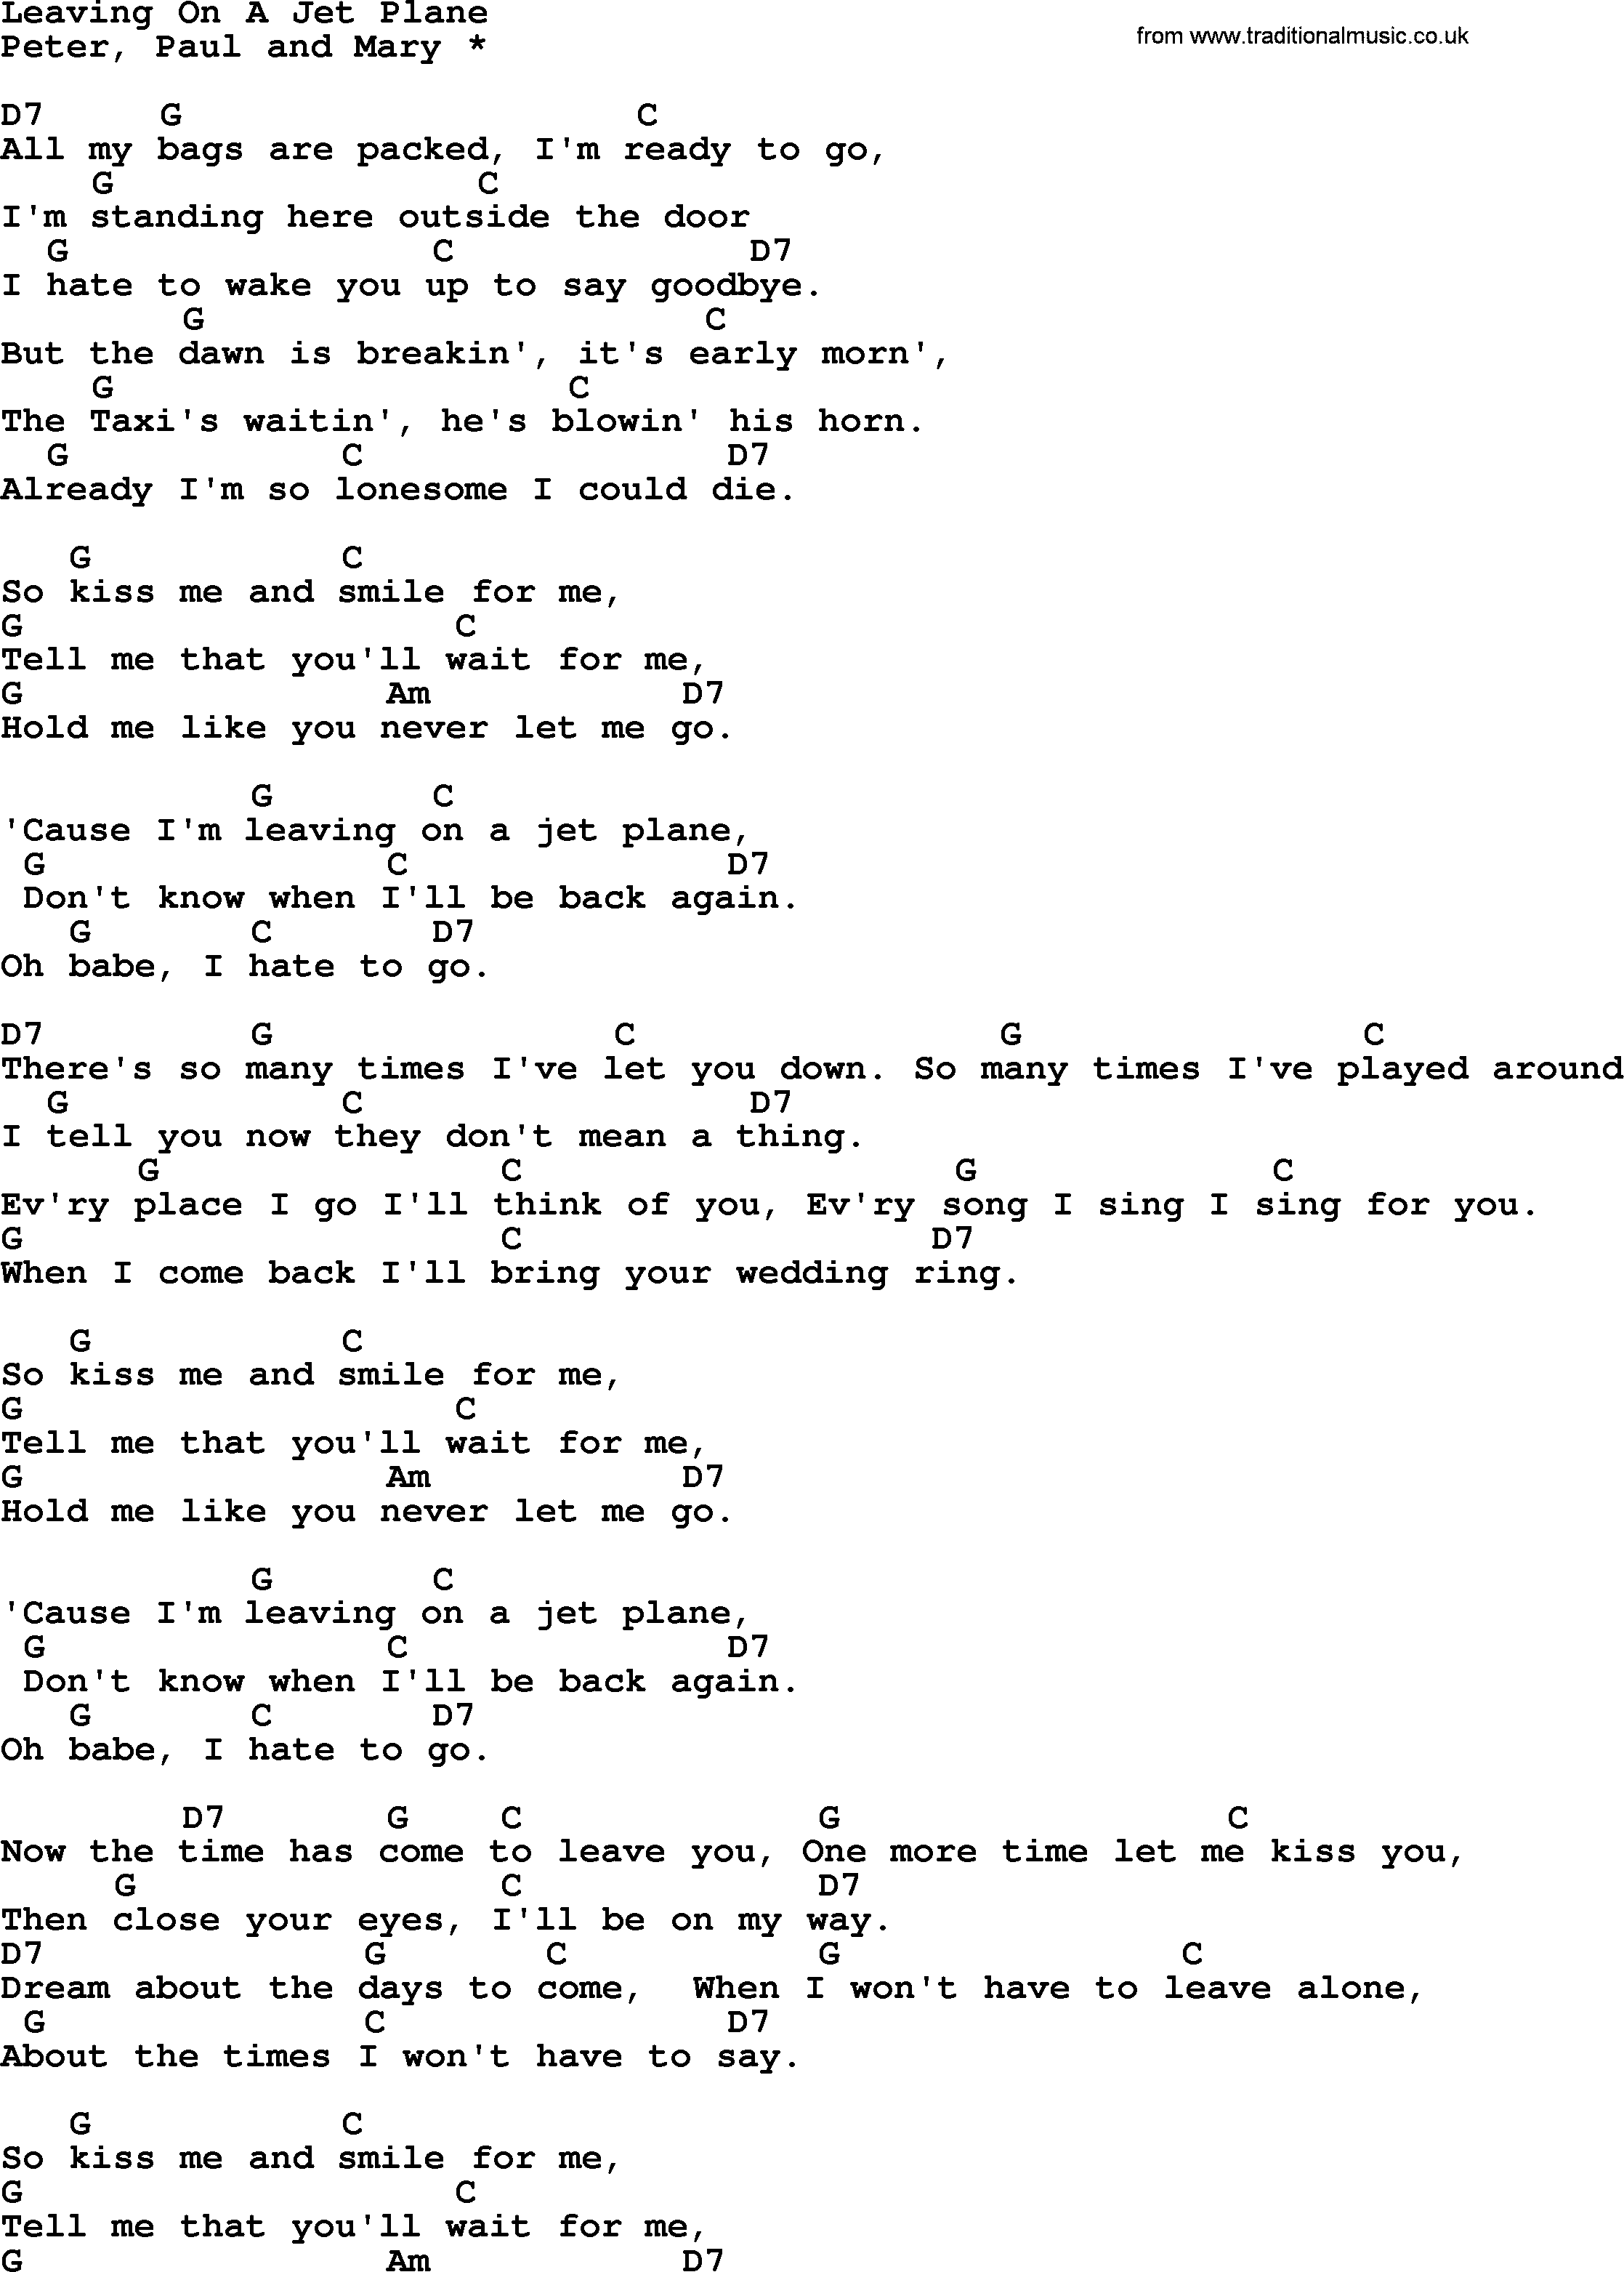 Peter, Paul and Mary song Leaving On A Jet Plane Ver2, lyrics and chords